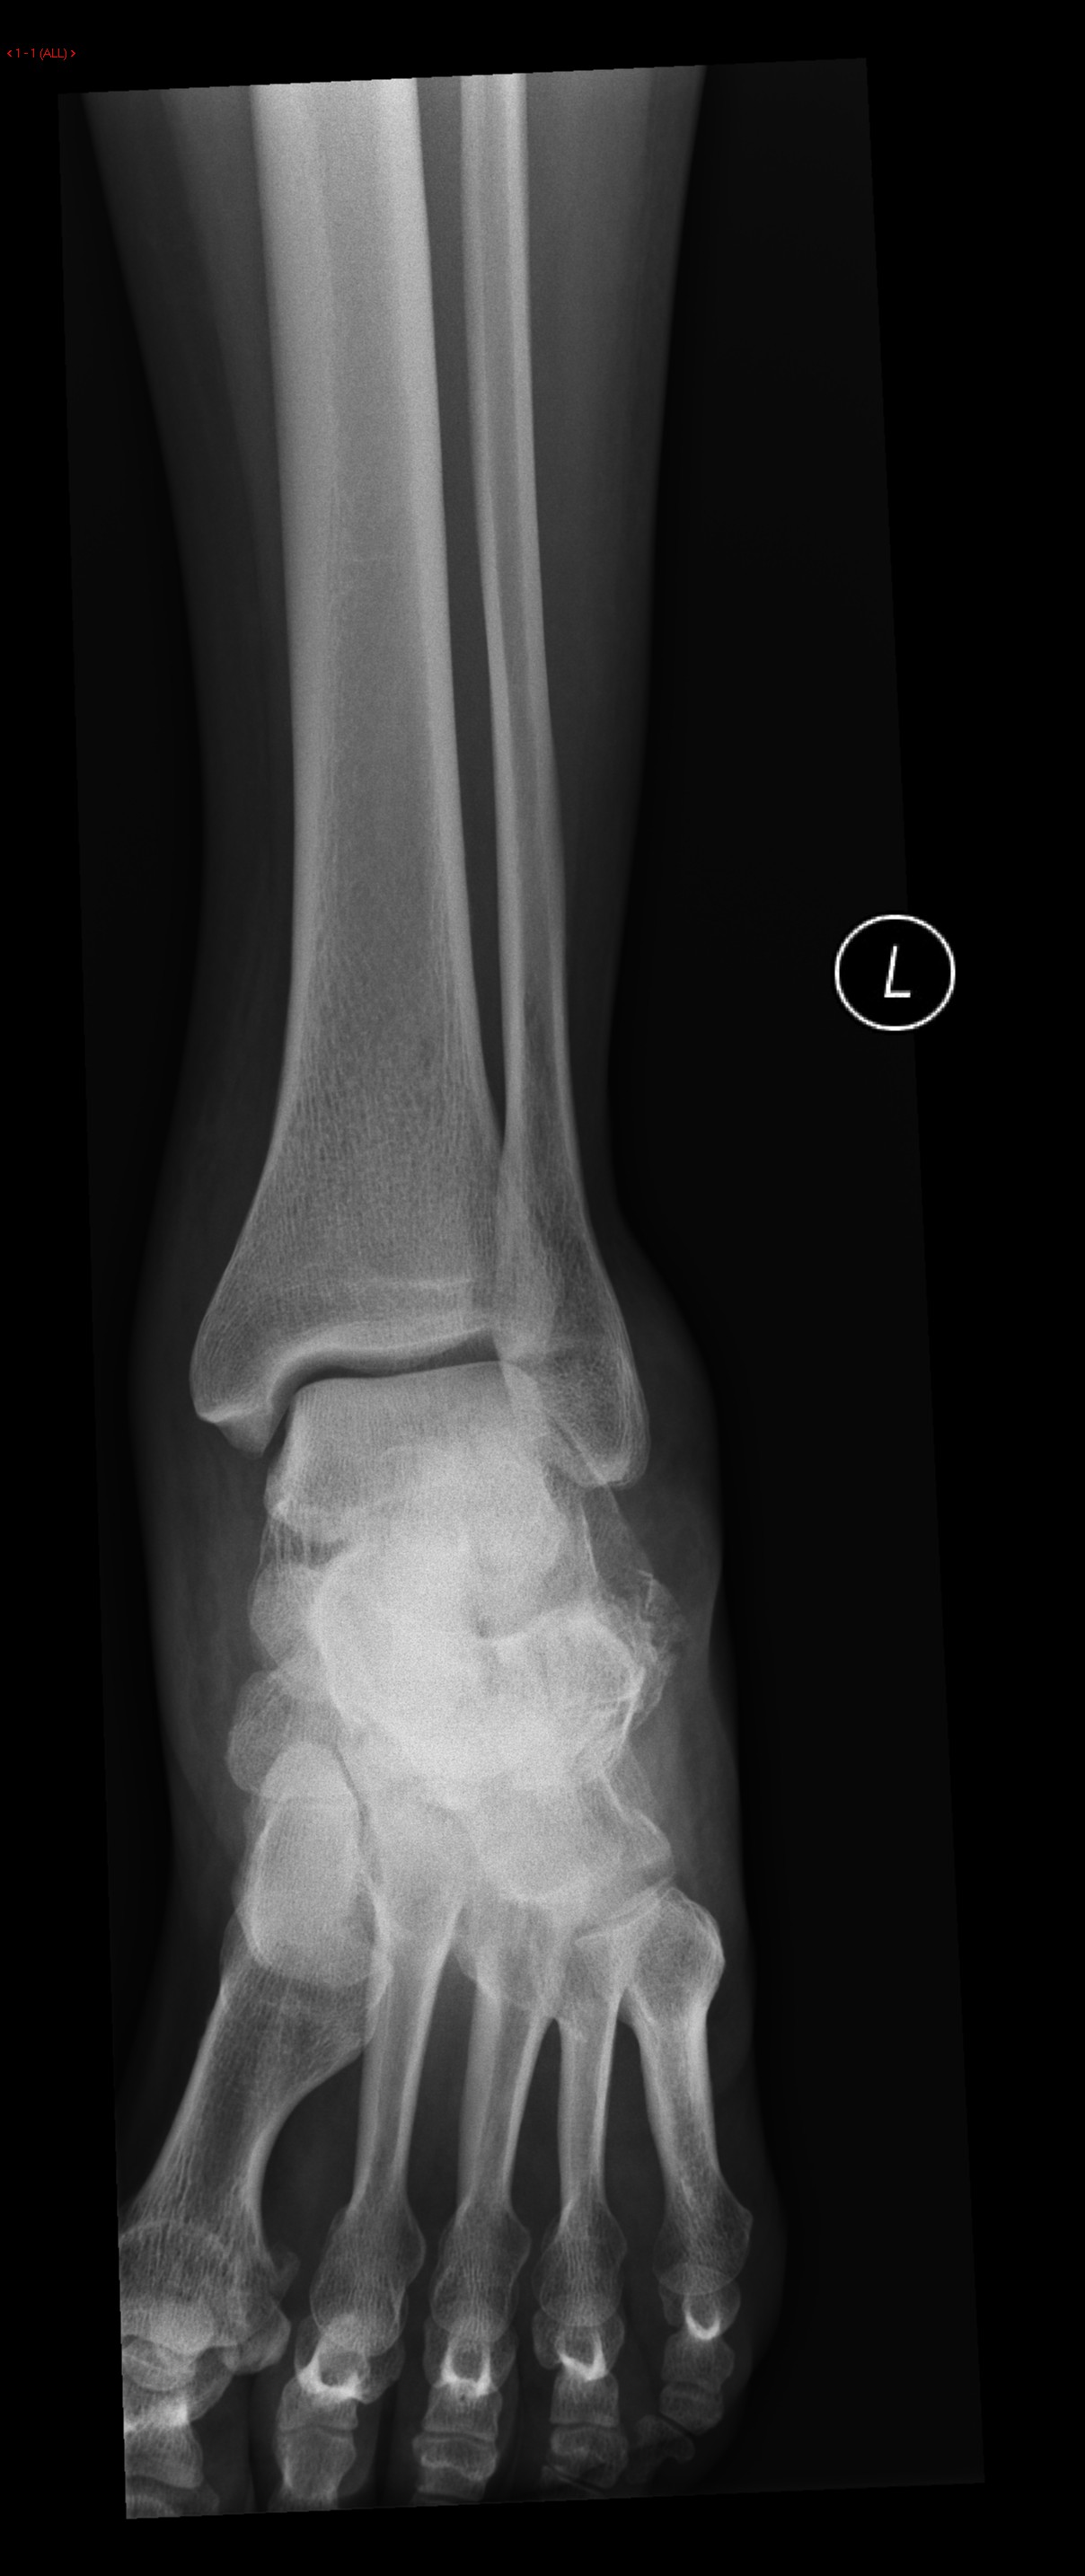 File:Calcaneal-fracture-and-associated-spinal-injury.jpg